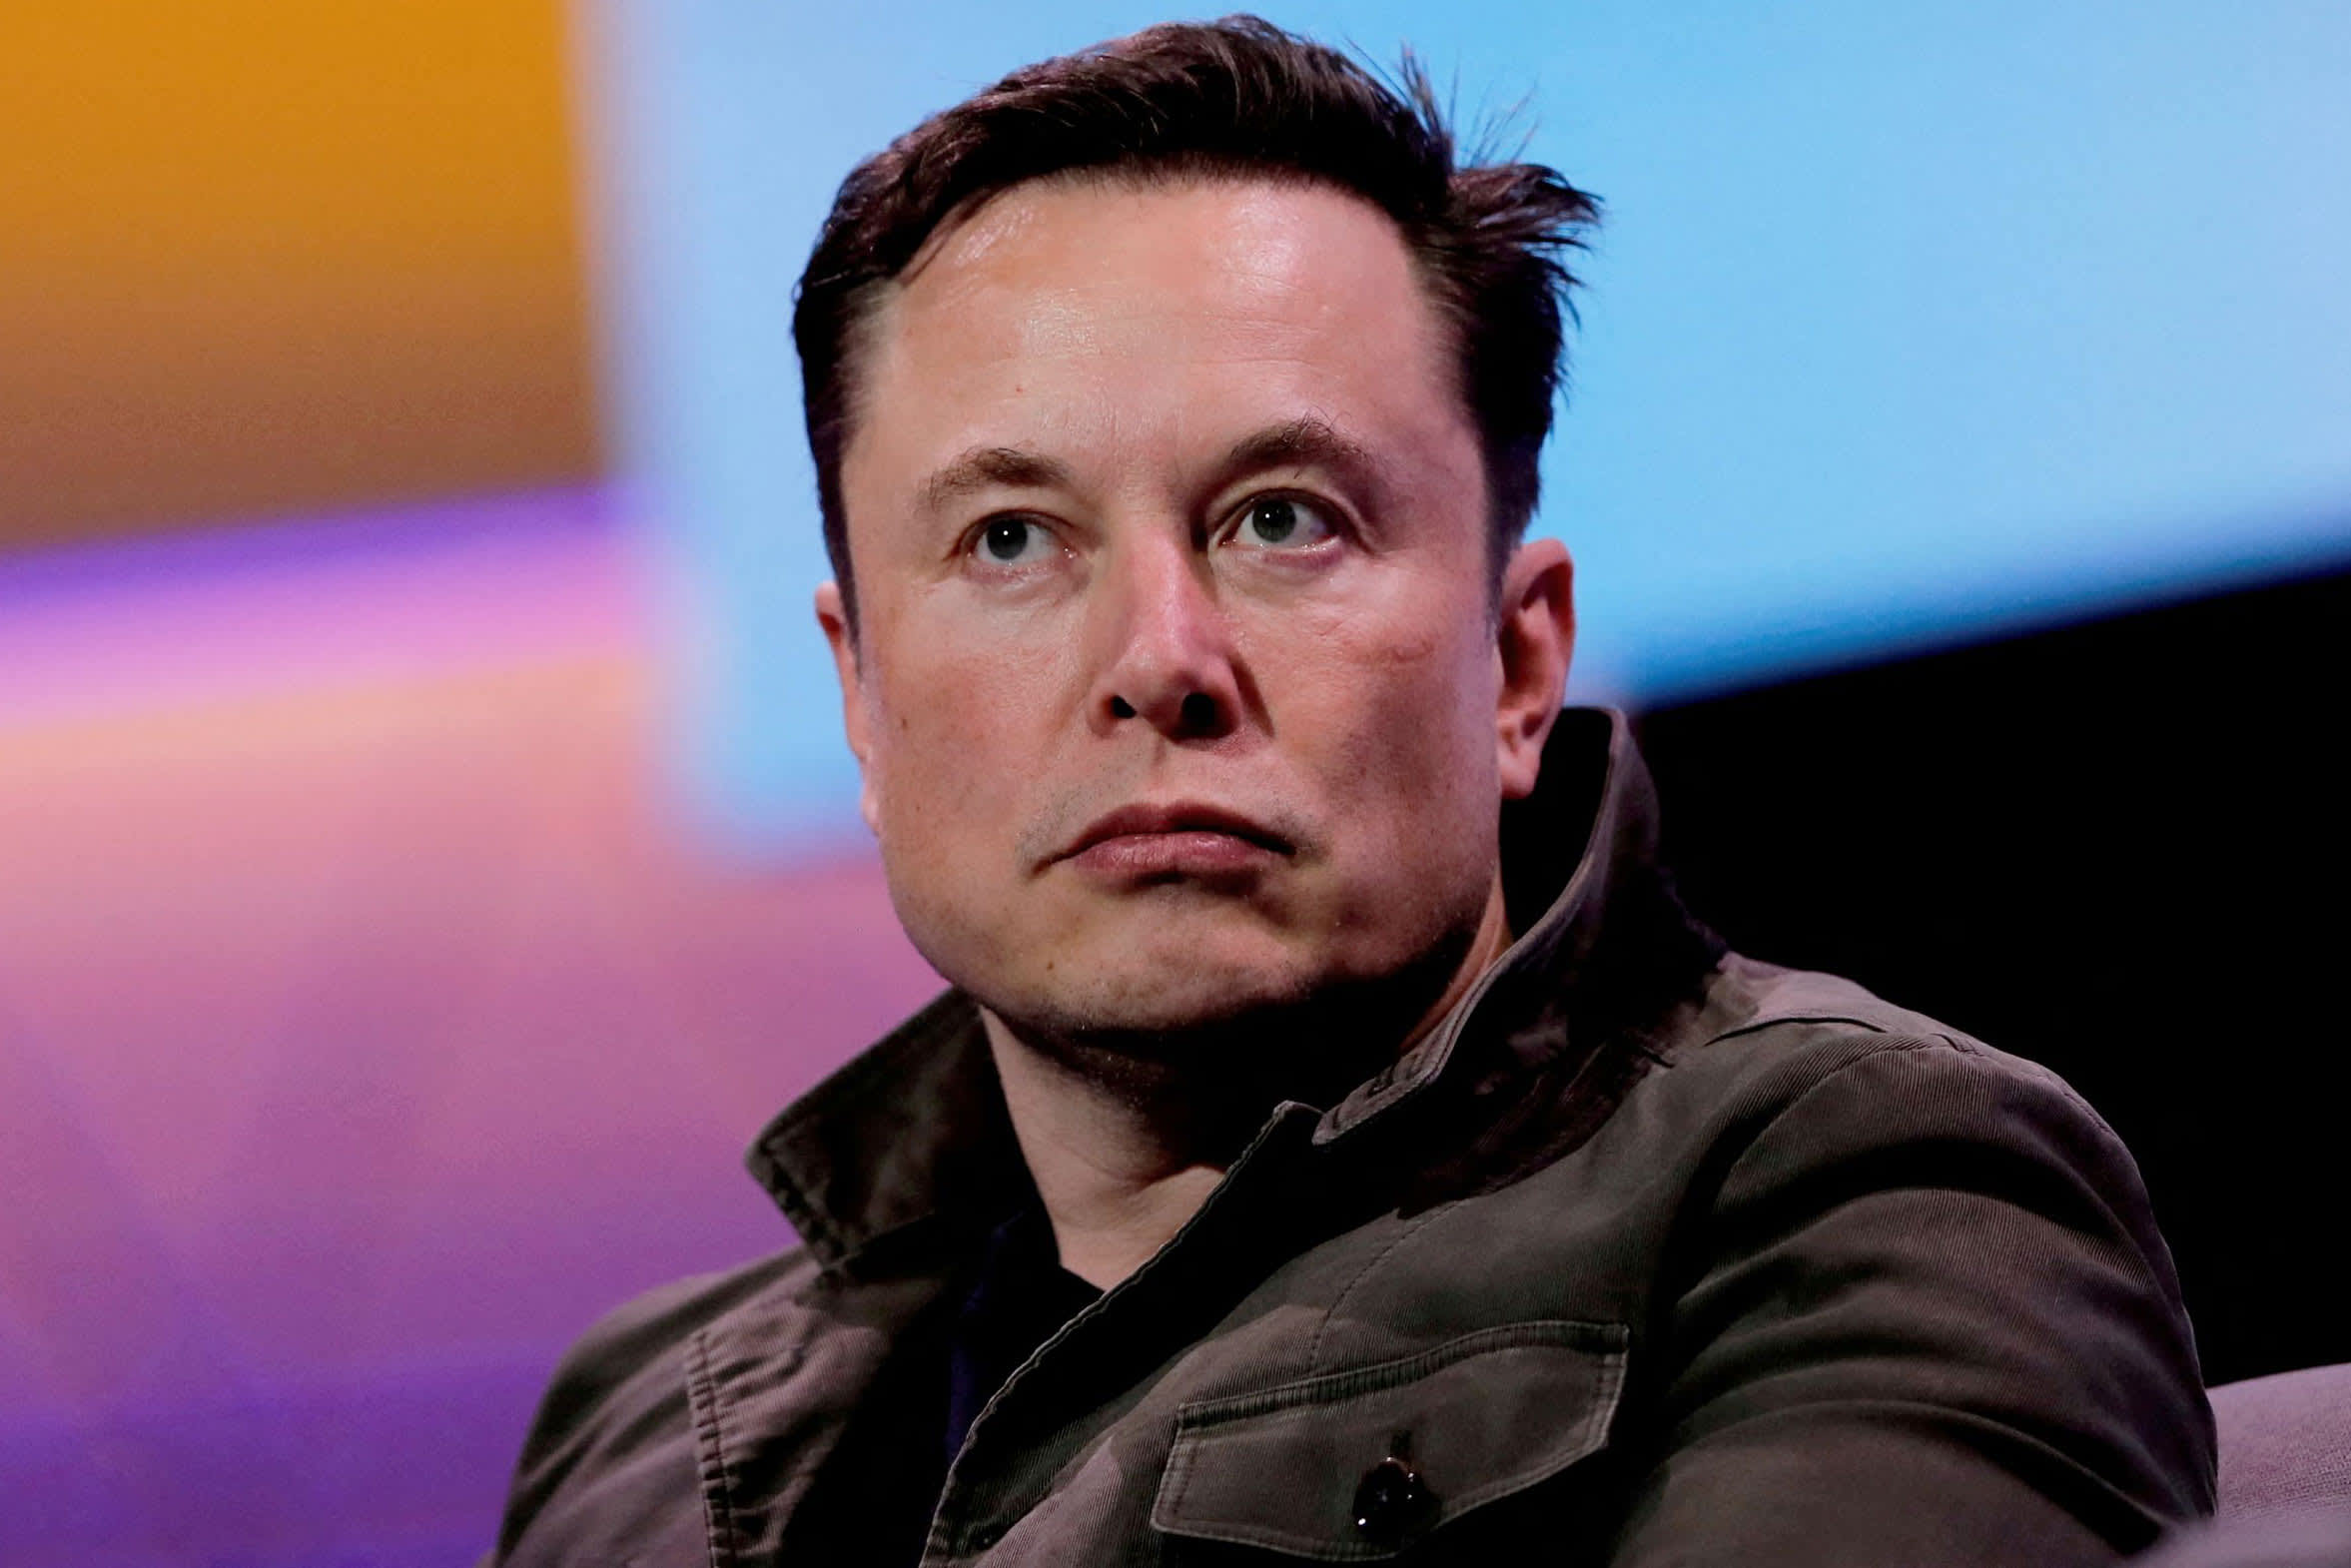 Elon Musk Experienced The Greatest Loss In Wealth Among Billionaires In 2022